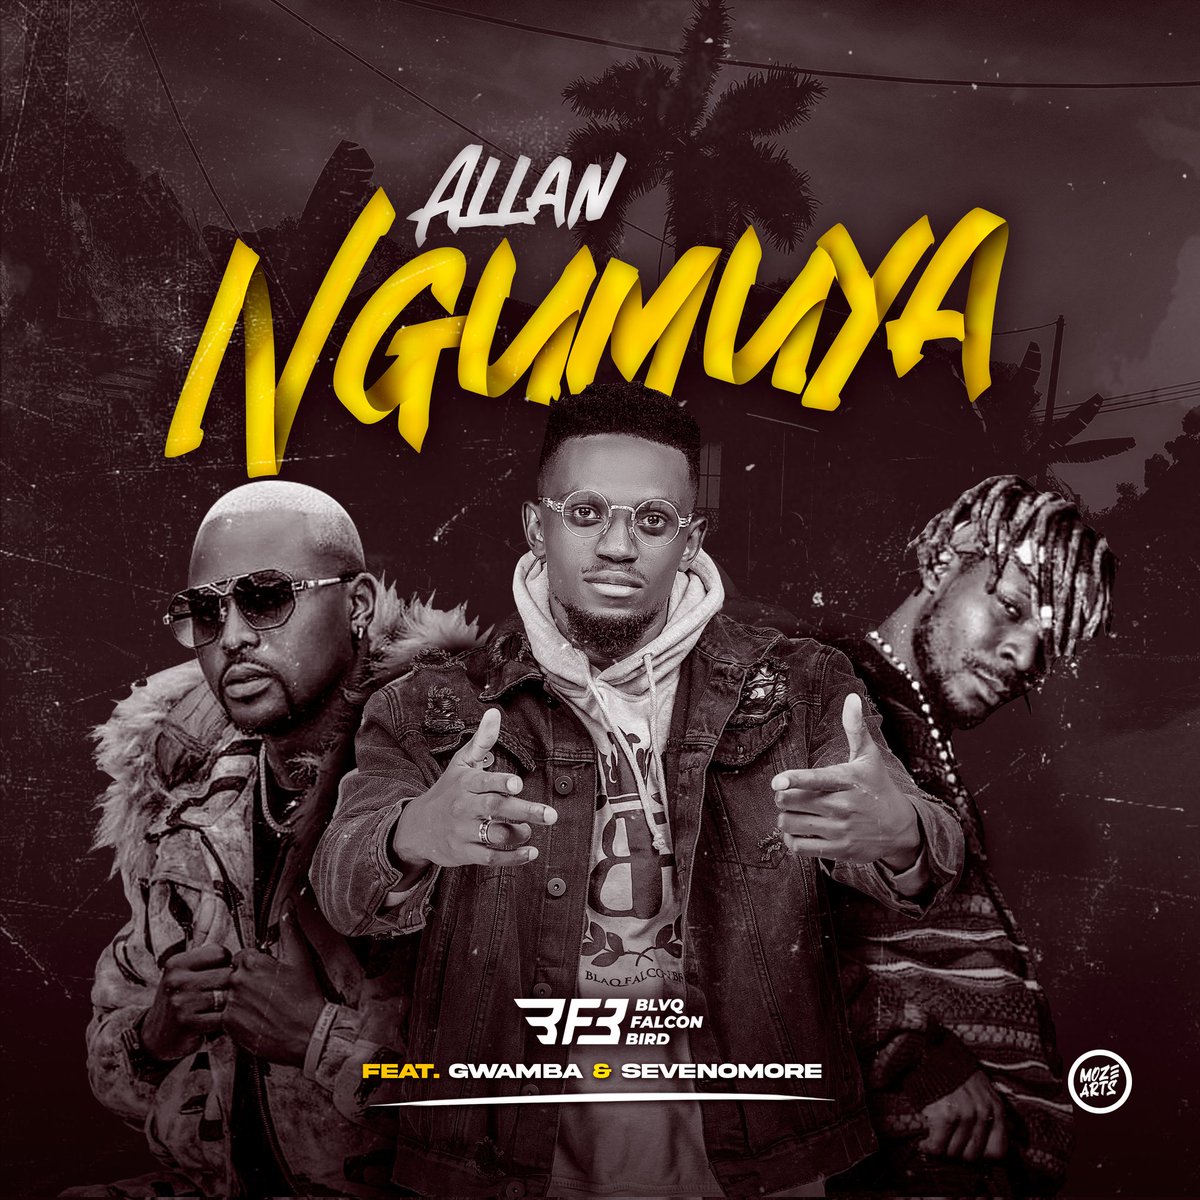 Allan Ngumuya feat @GwambaOfficial and @SevenOmore1 download link and don't forget to RT 👇🏾 malawi-music.com/B/173-bfb/1160…